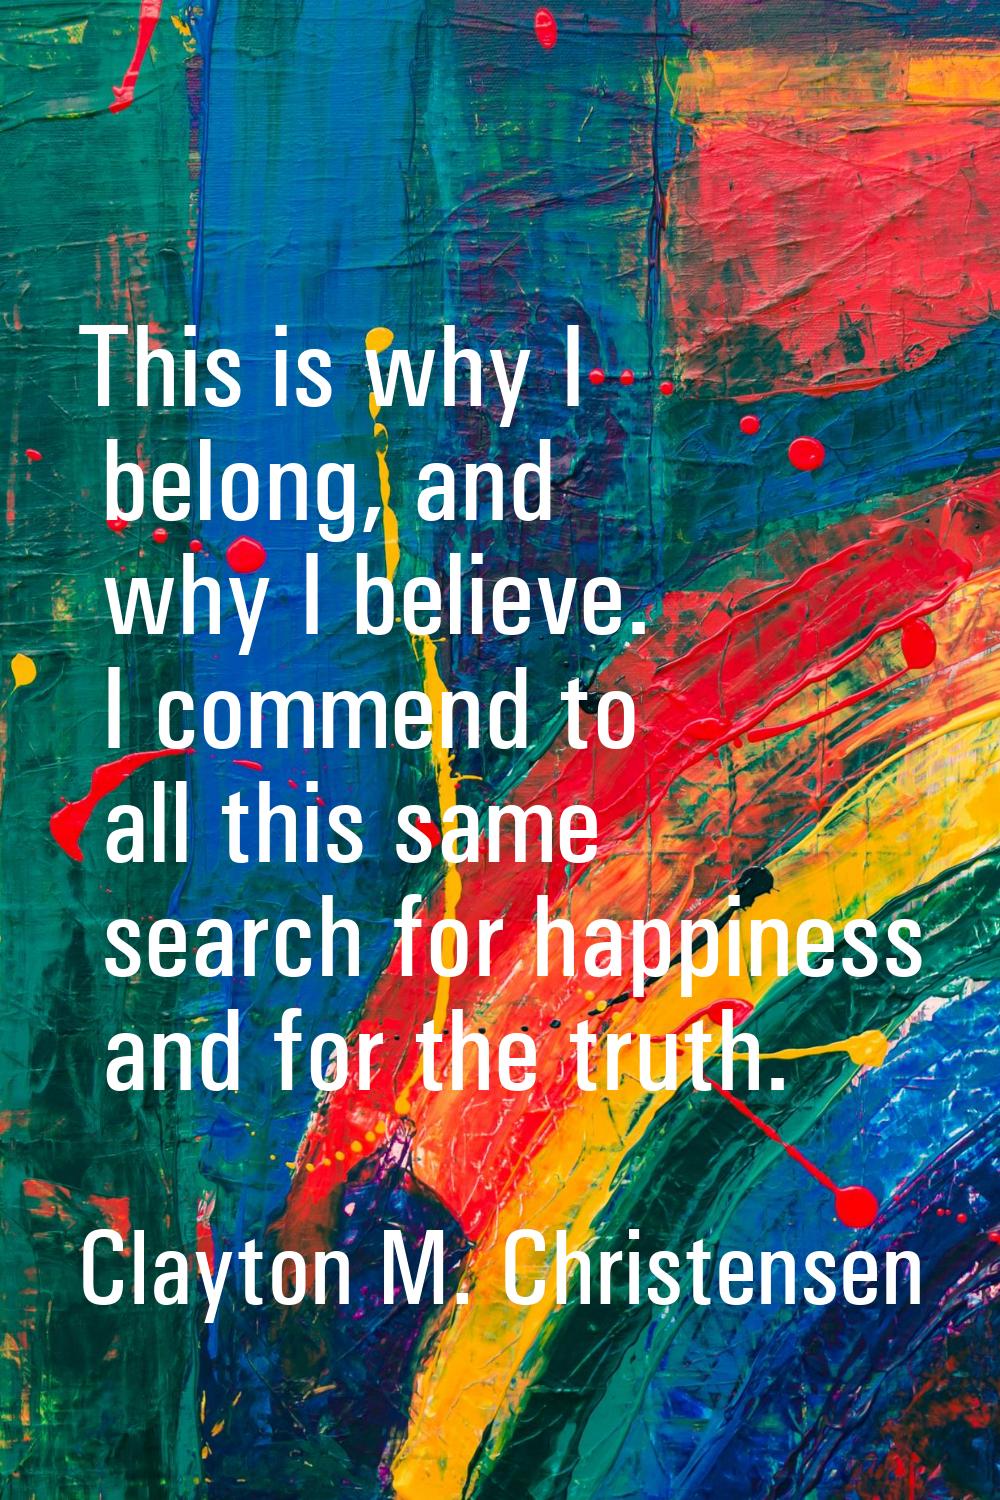 This is why I belong, and why I believe. I commend to all this same search for happiness and for th